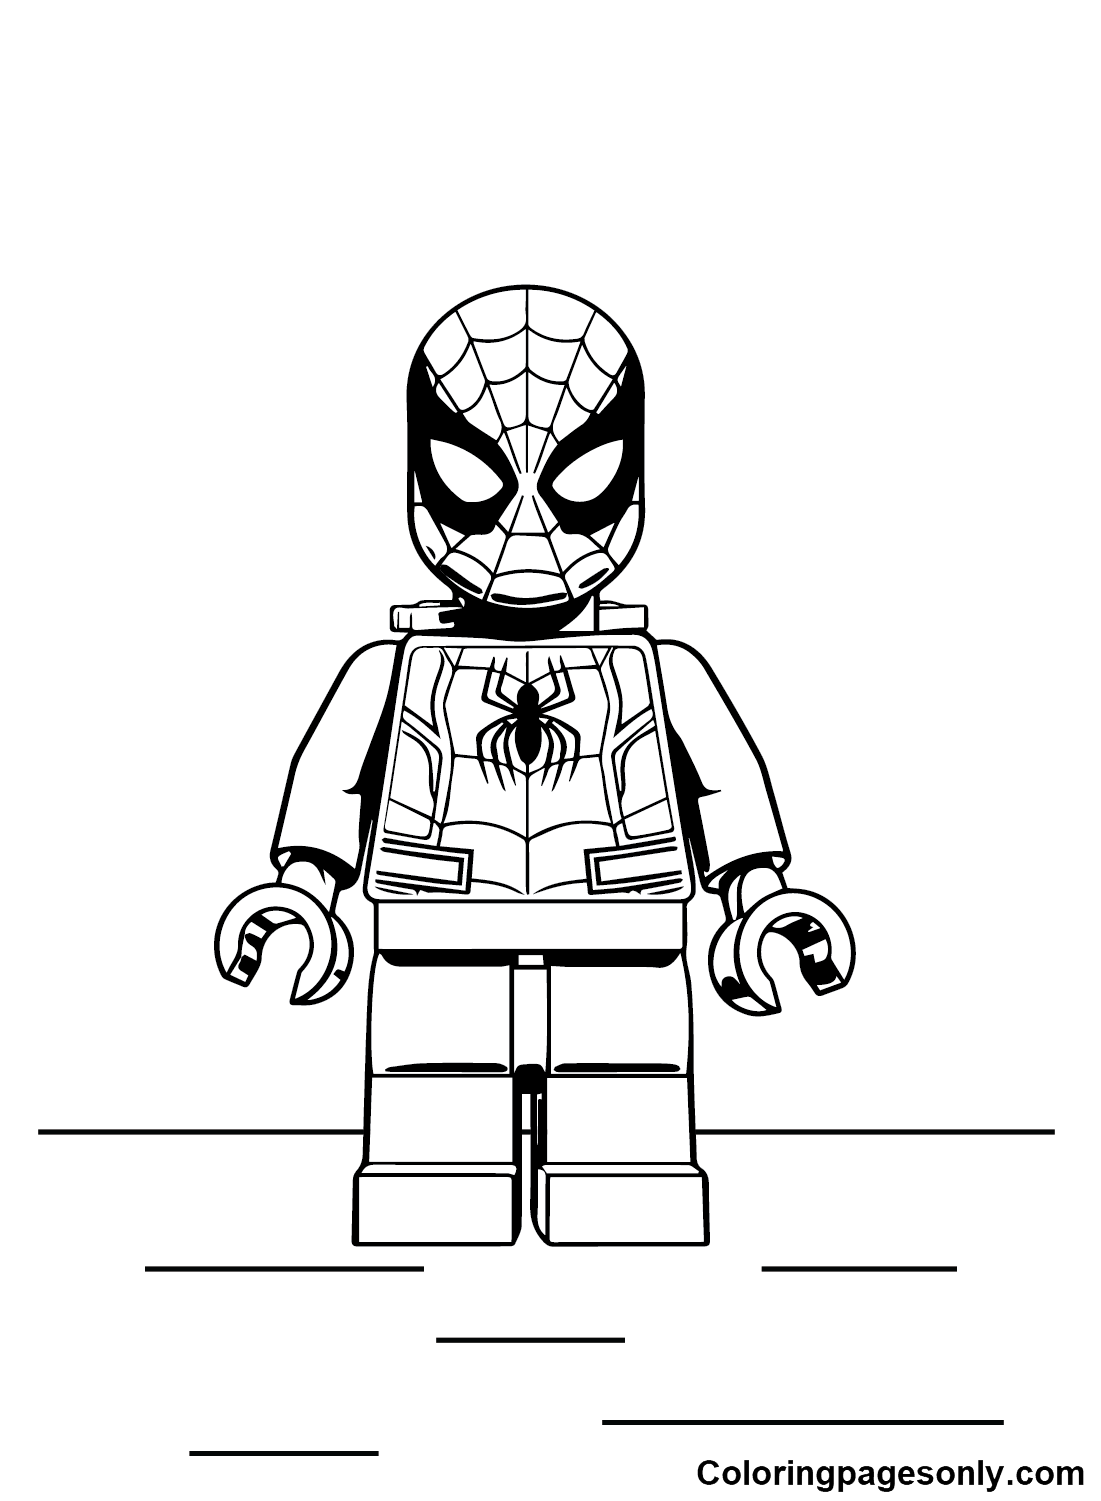 Lego Spiderman Toys Coloring Pages